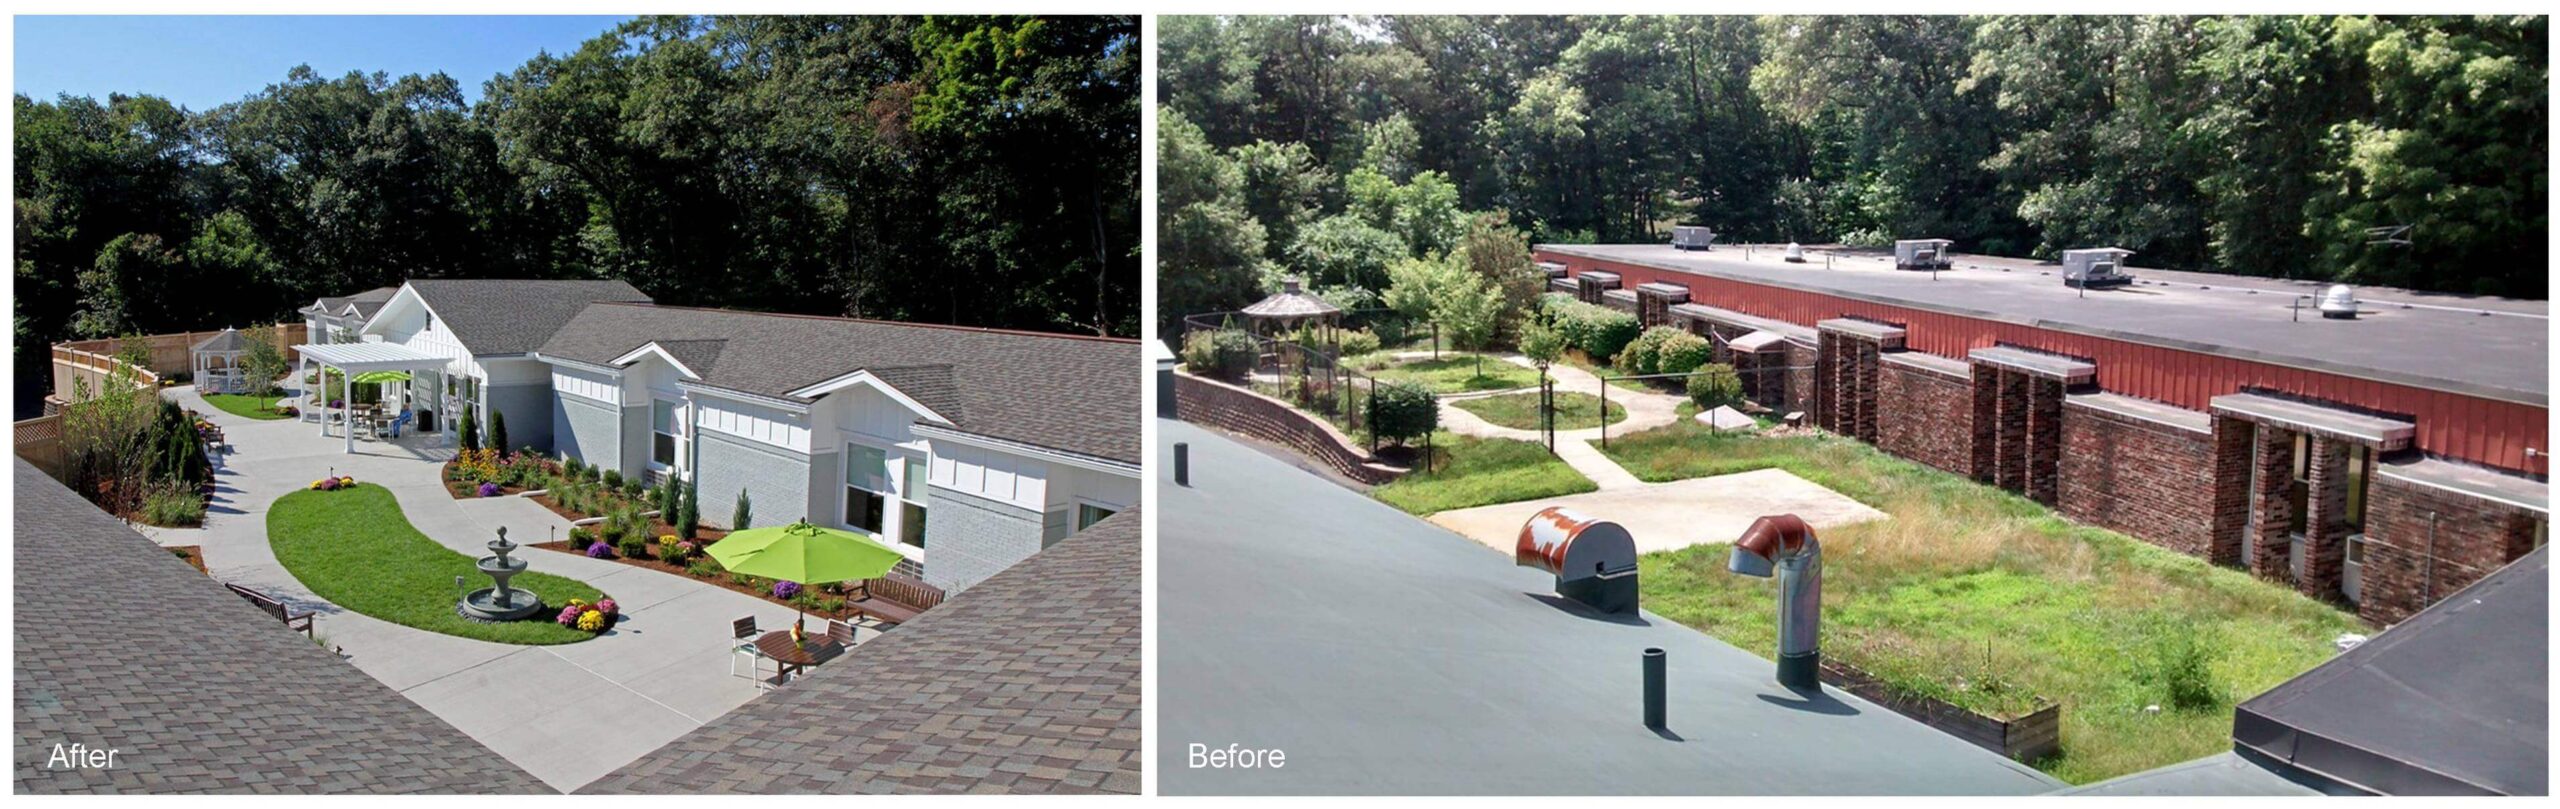 Collage photo showing two images side by side. The images show exterior views of a building with grassy area and plantings in front - it is a before and after comparison showing the remodeling and revitalization of the building and greenspace areas.